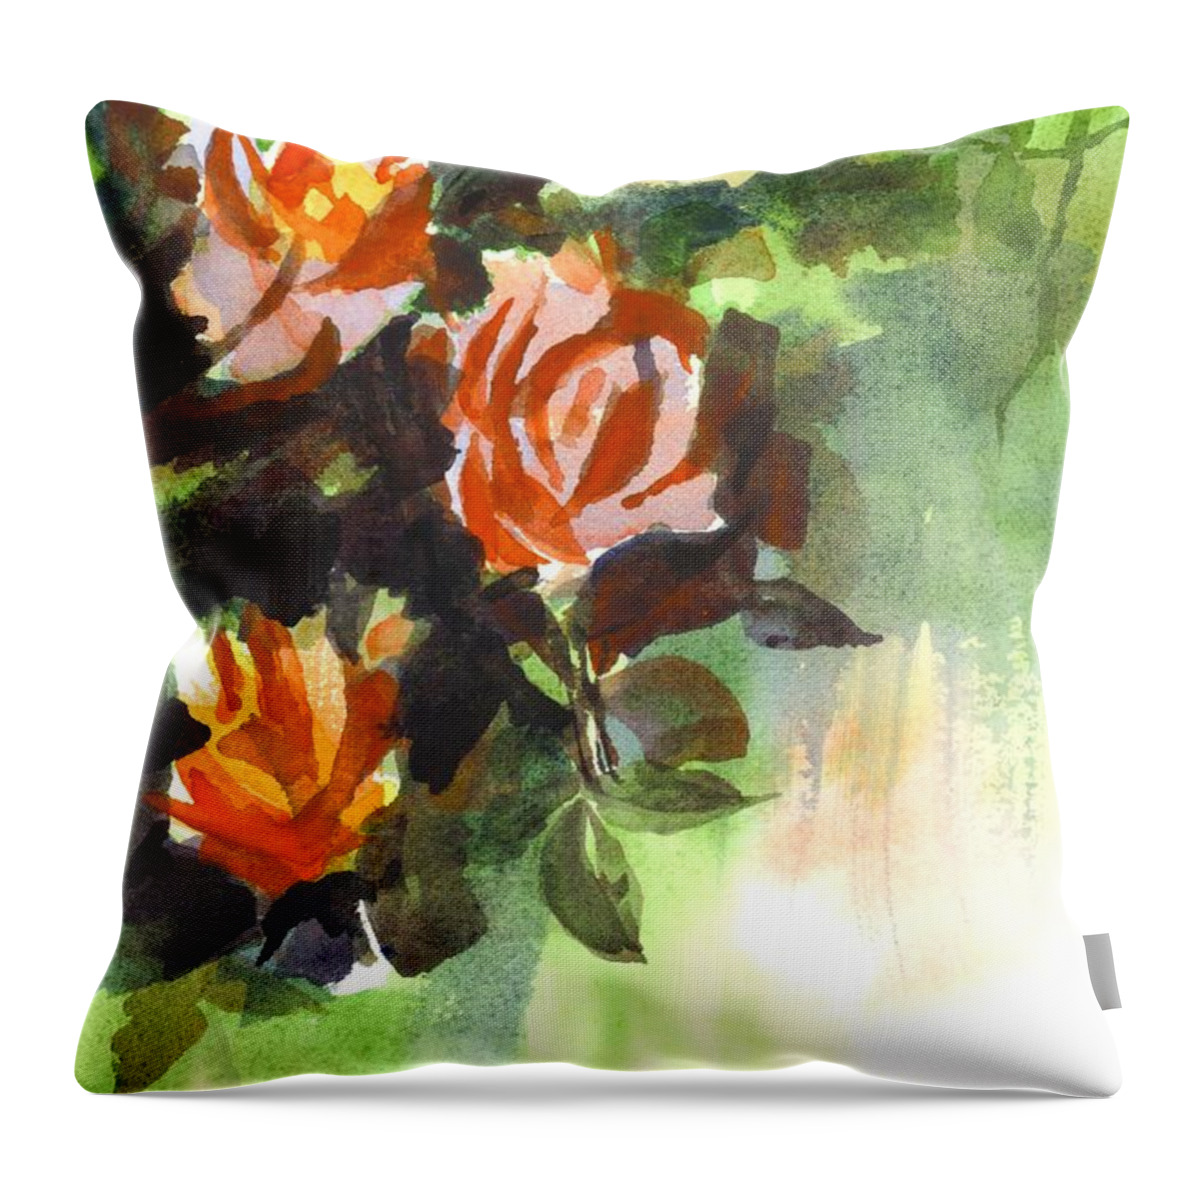 Fugitive Red Roses Throw Pillow featuring the painting Fugitive Red Roses by Kip DeVore